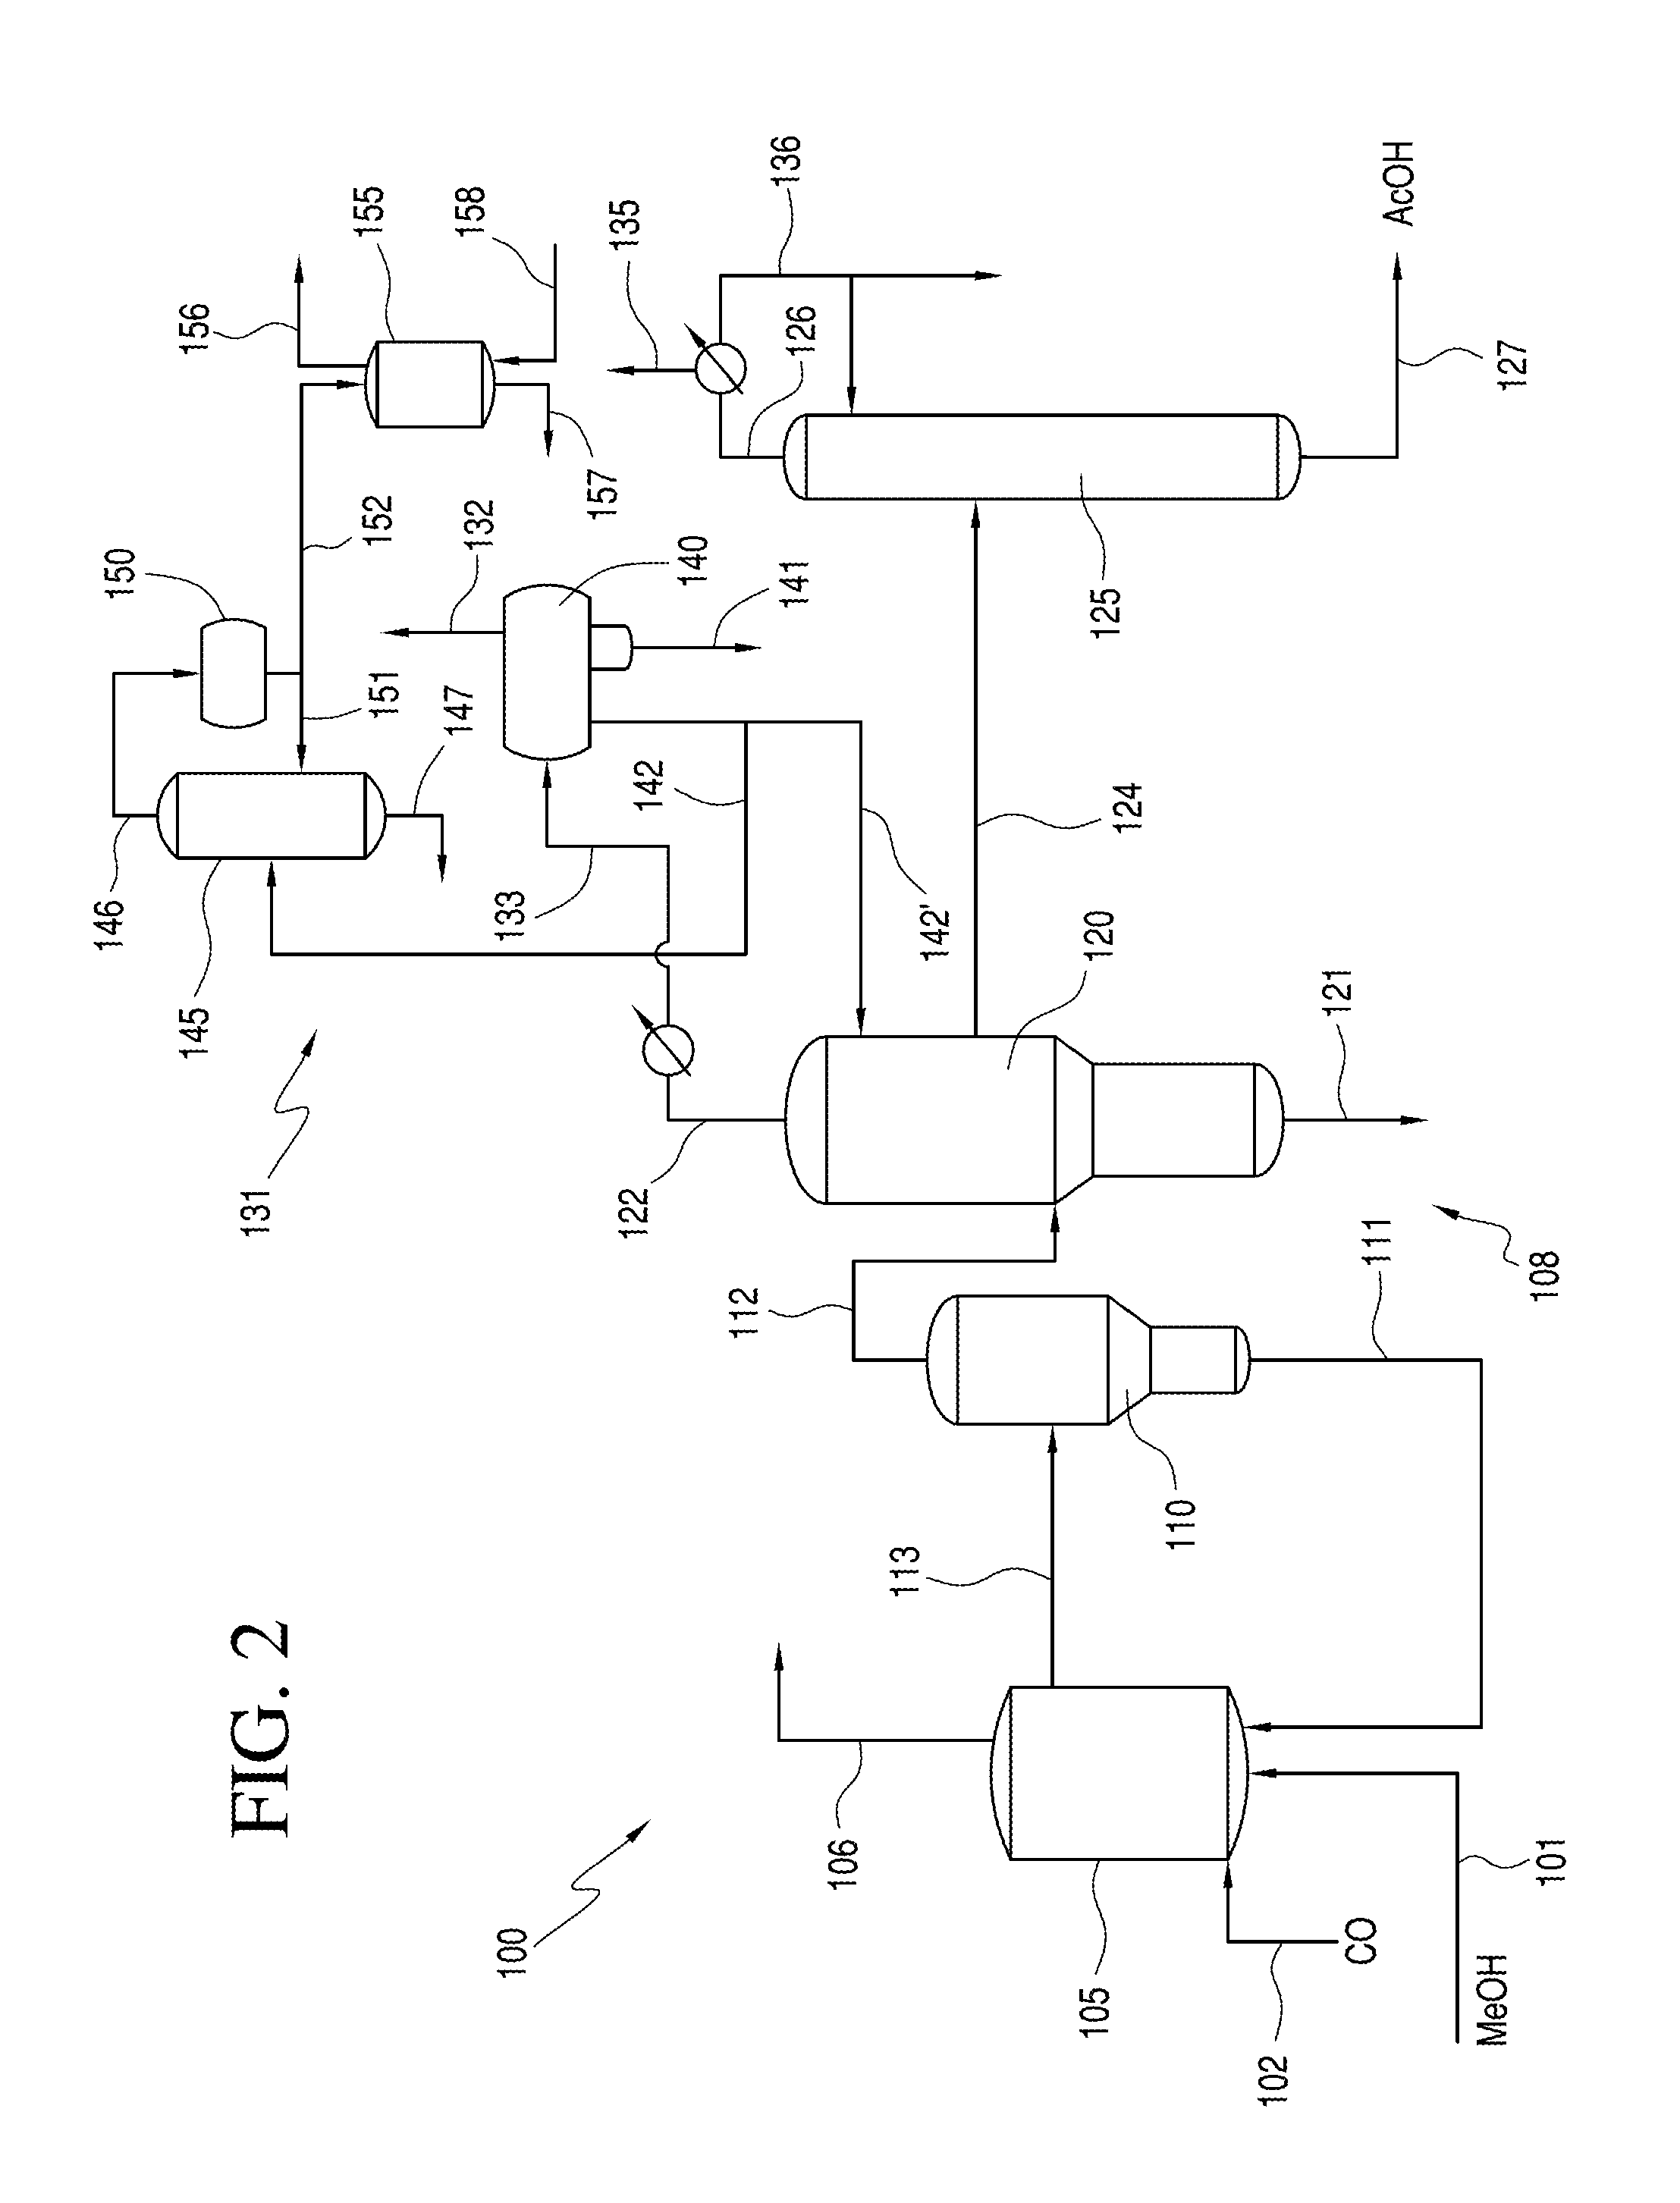 Processes for producing acetic acid from a reaction medium having low ethyl iodide content